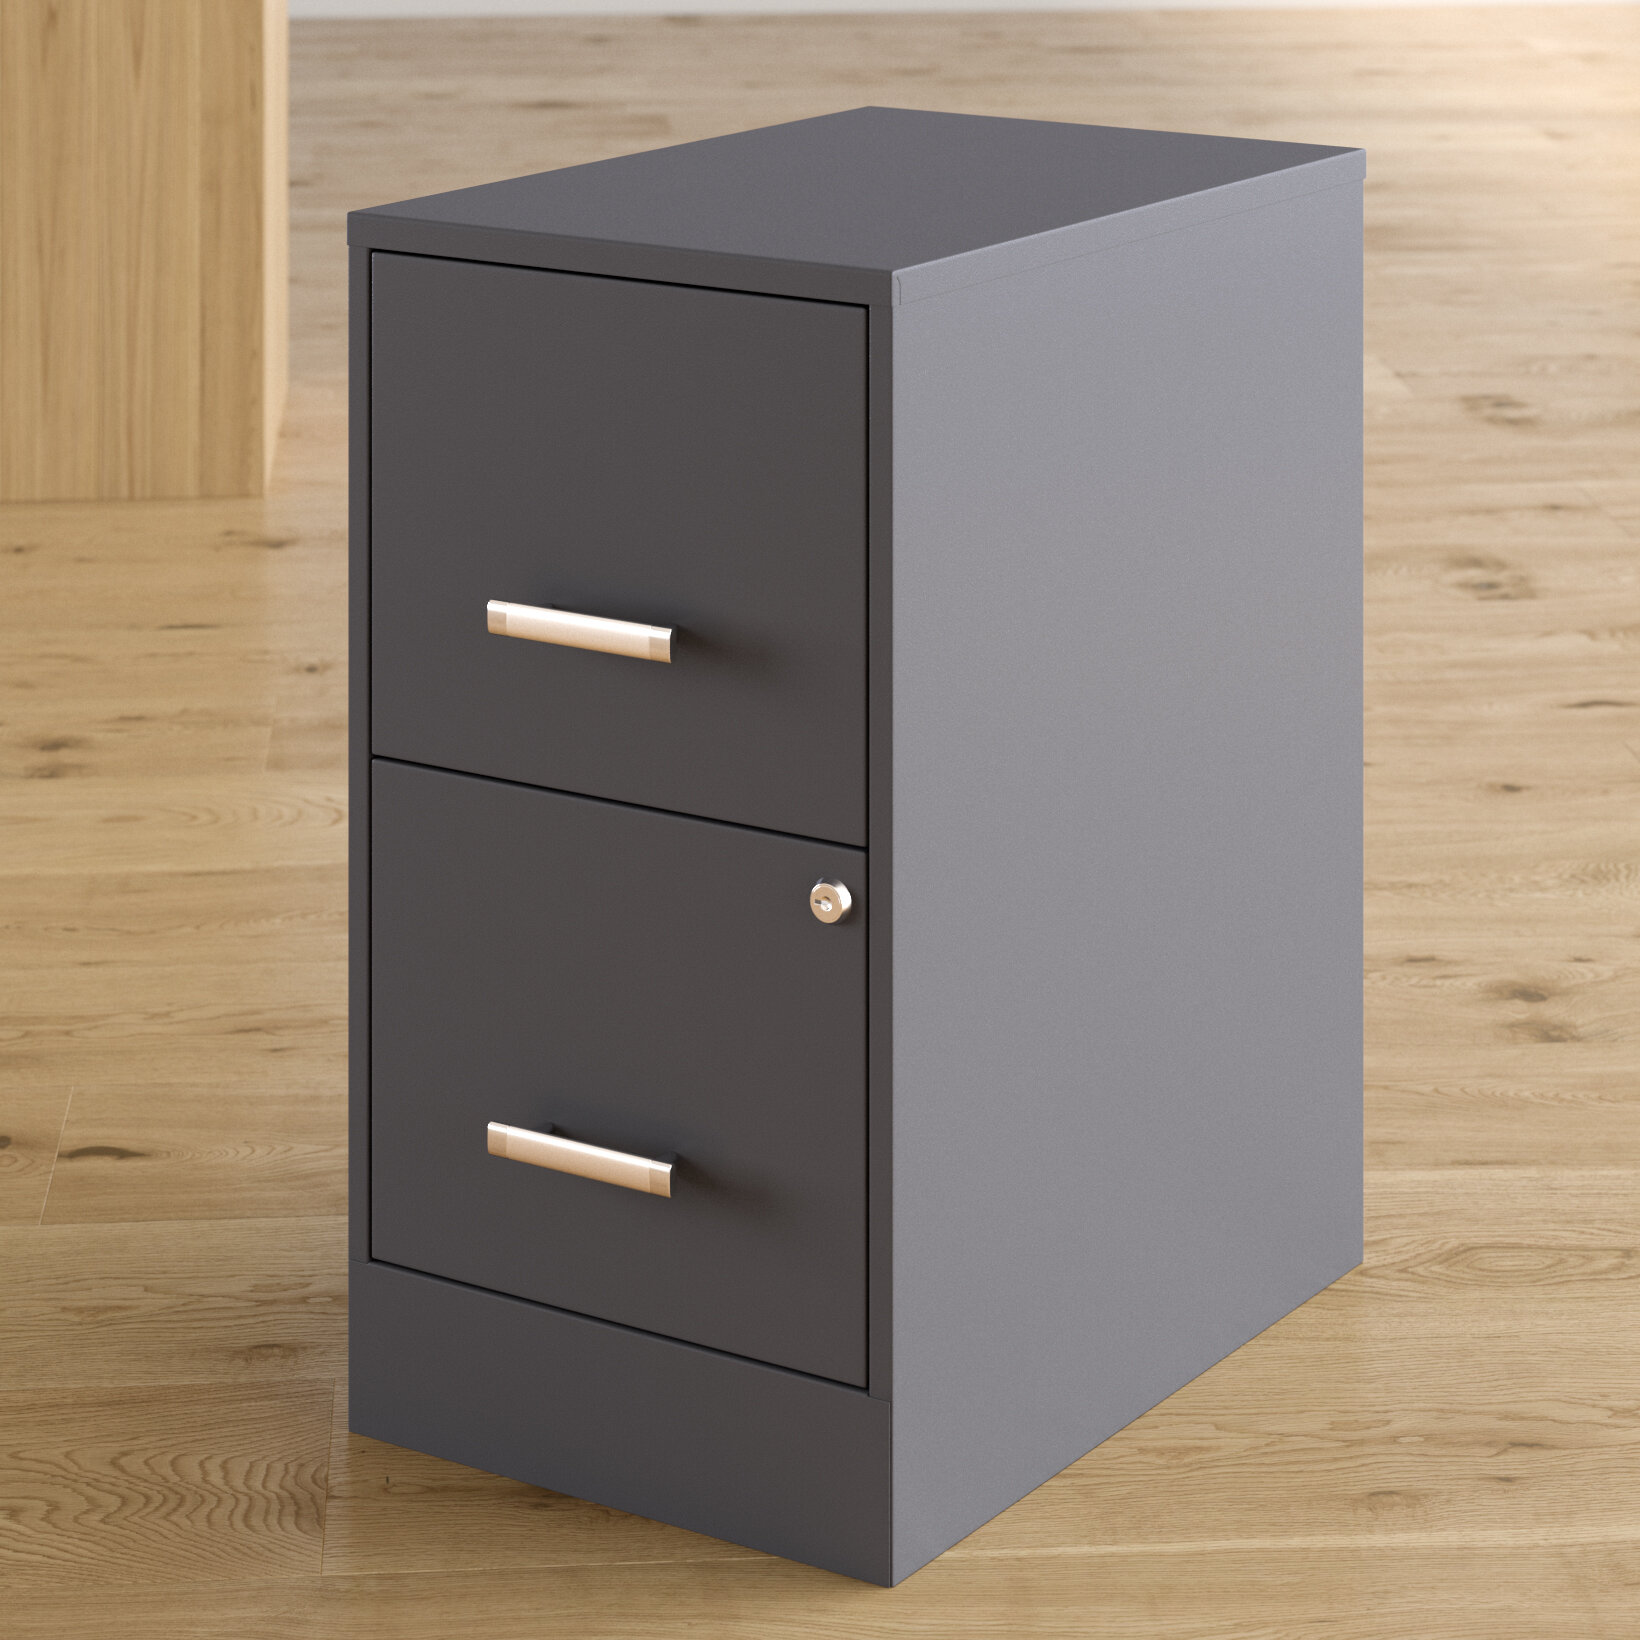 Hogge Office Designs 3 Drawer Vertical Filing Cabinet Orice